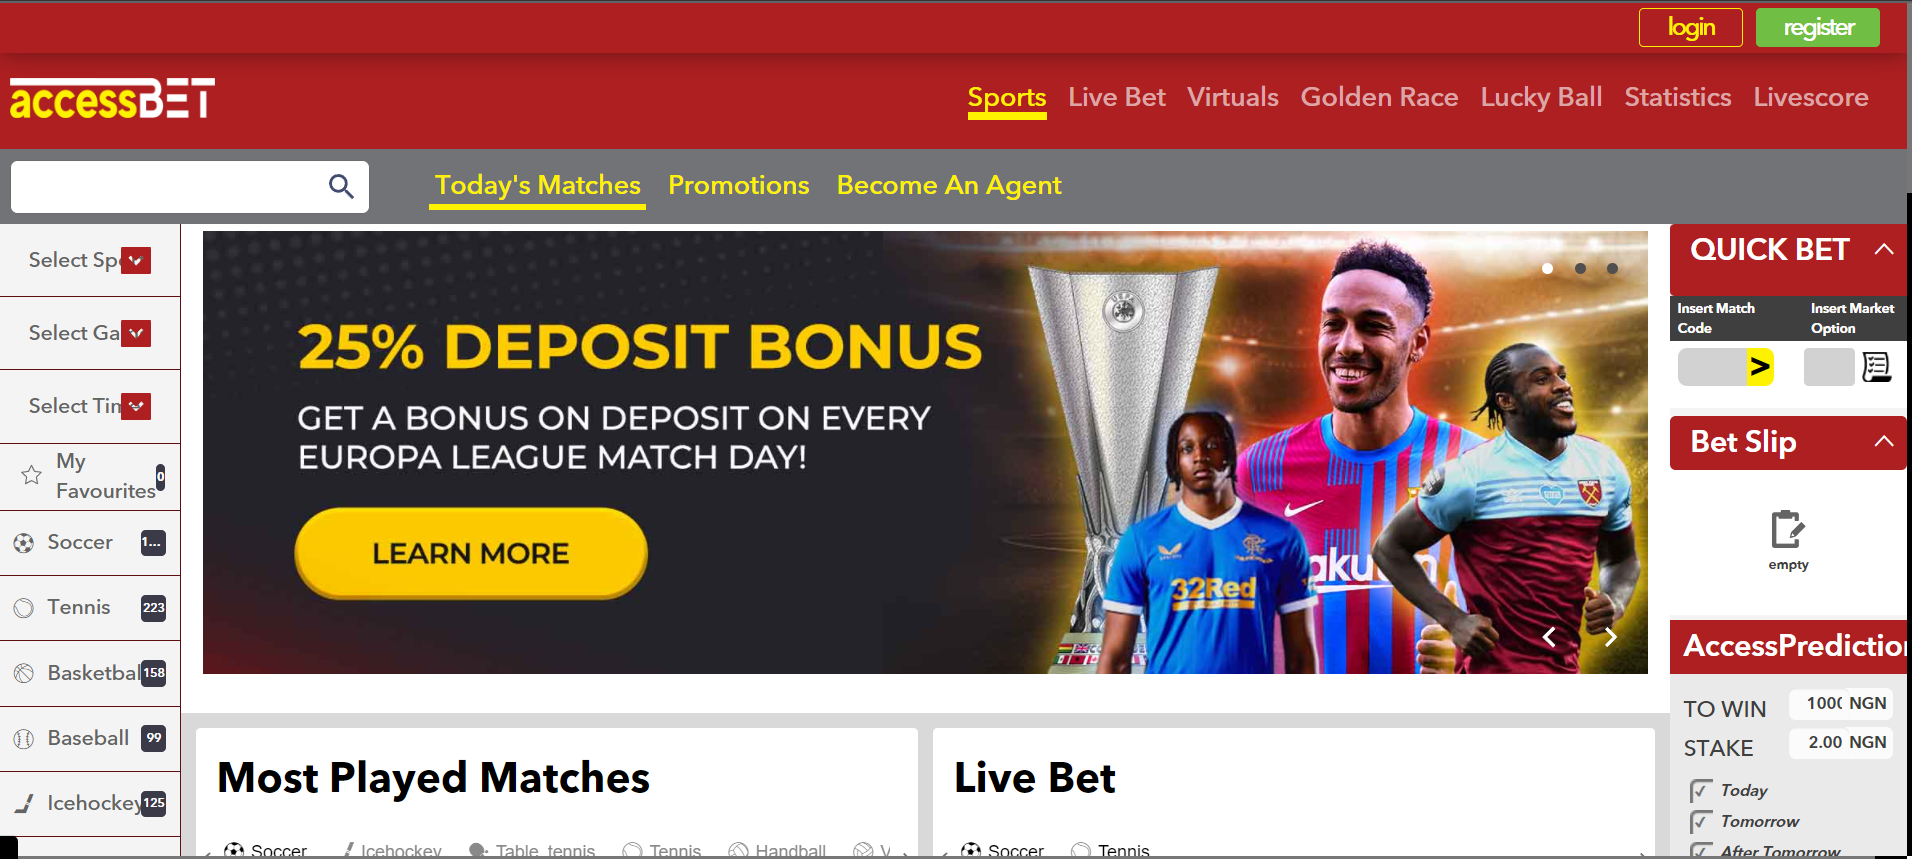 Access bet offers secured online betting services to all its customers